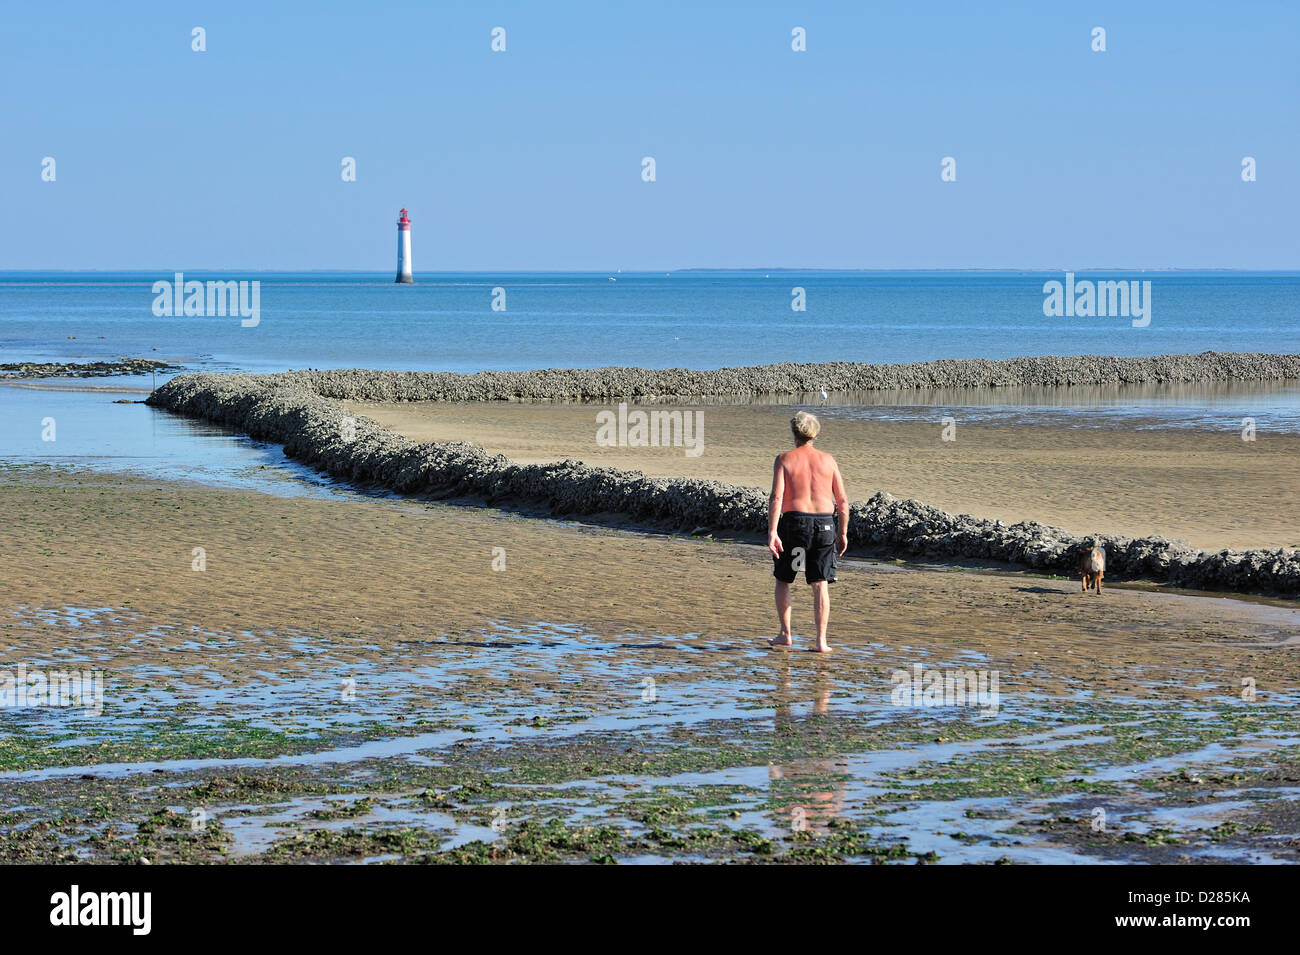 Fish lock / écluse, traditional way of trapping fish at low tide on the island Ile de Ré, Charente-Maritime, France Stock Photo